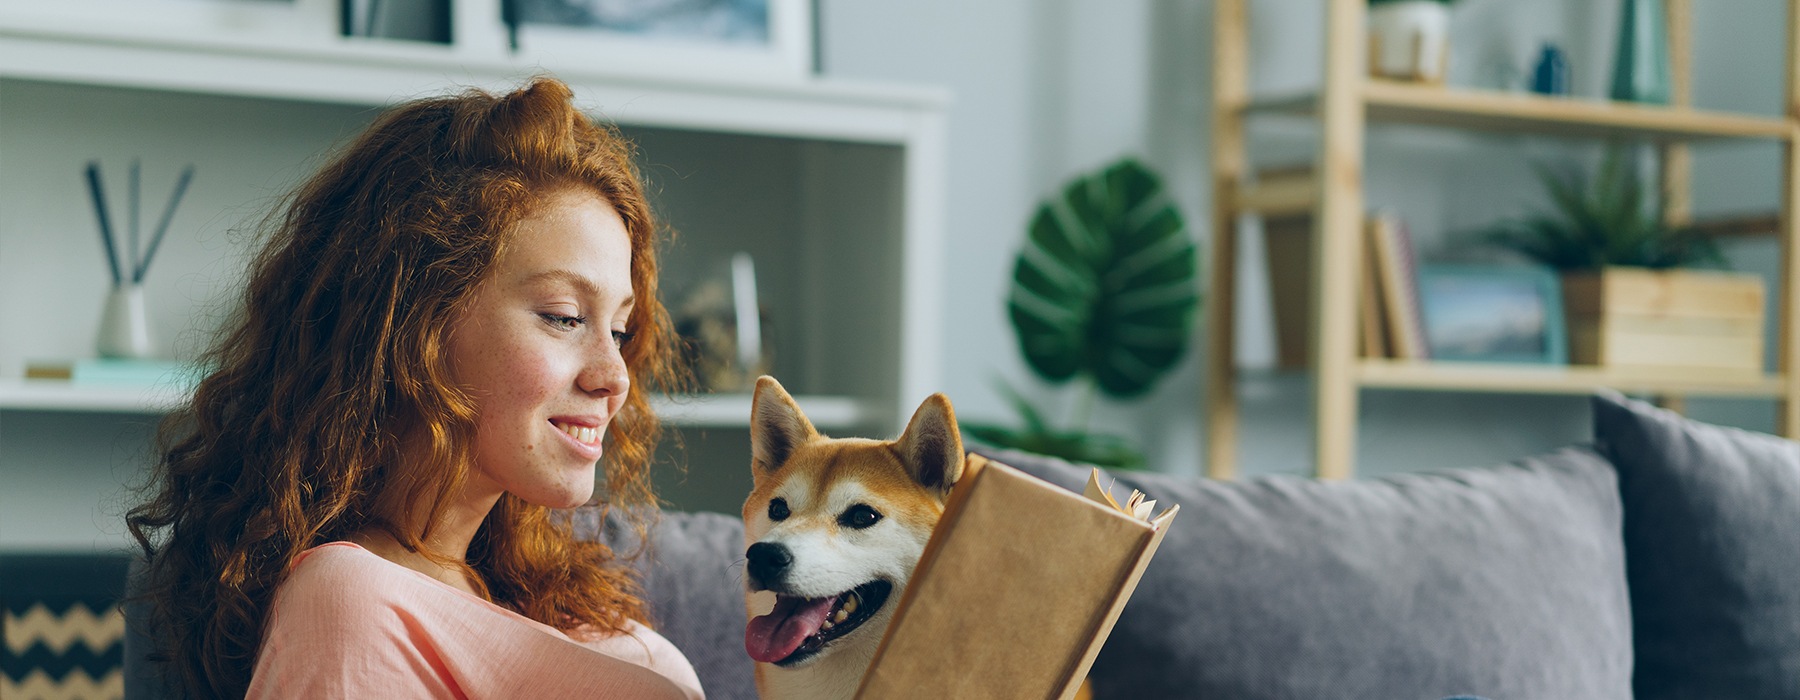 a woman reading a book with a dog